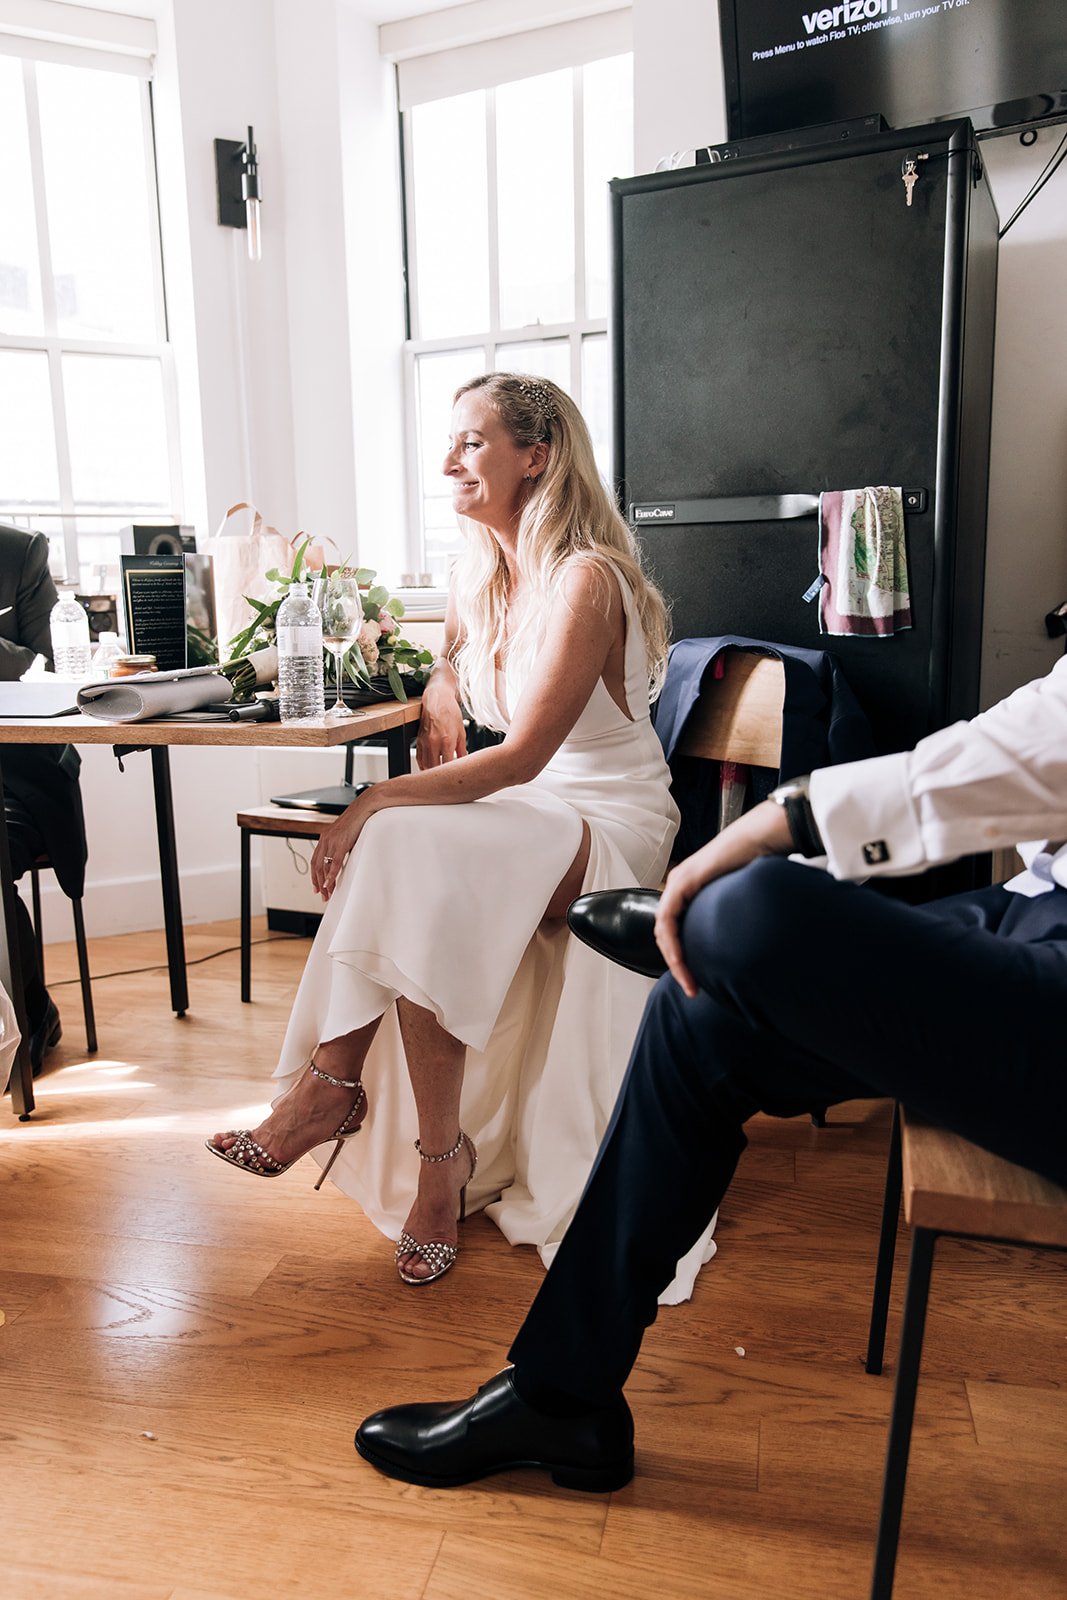 Intimate Wall Street Wedding With An Old New York Reception